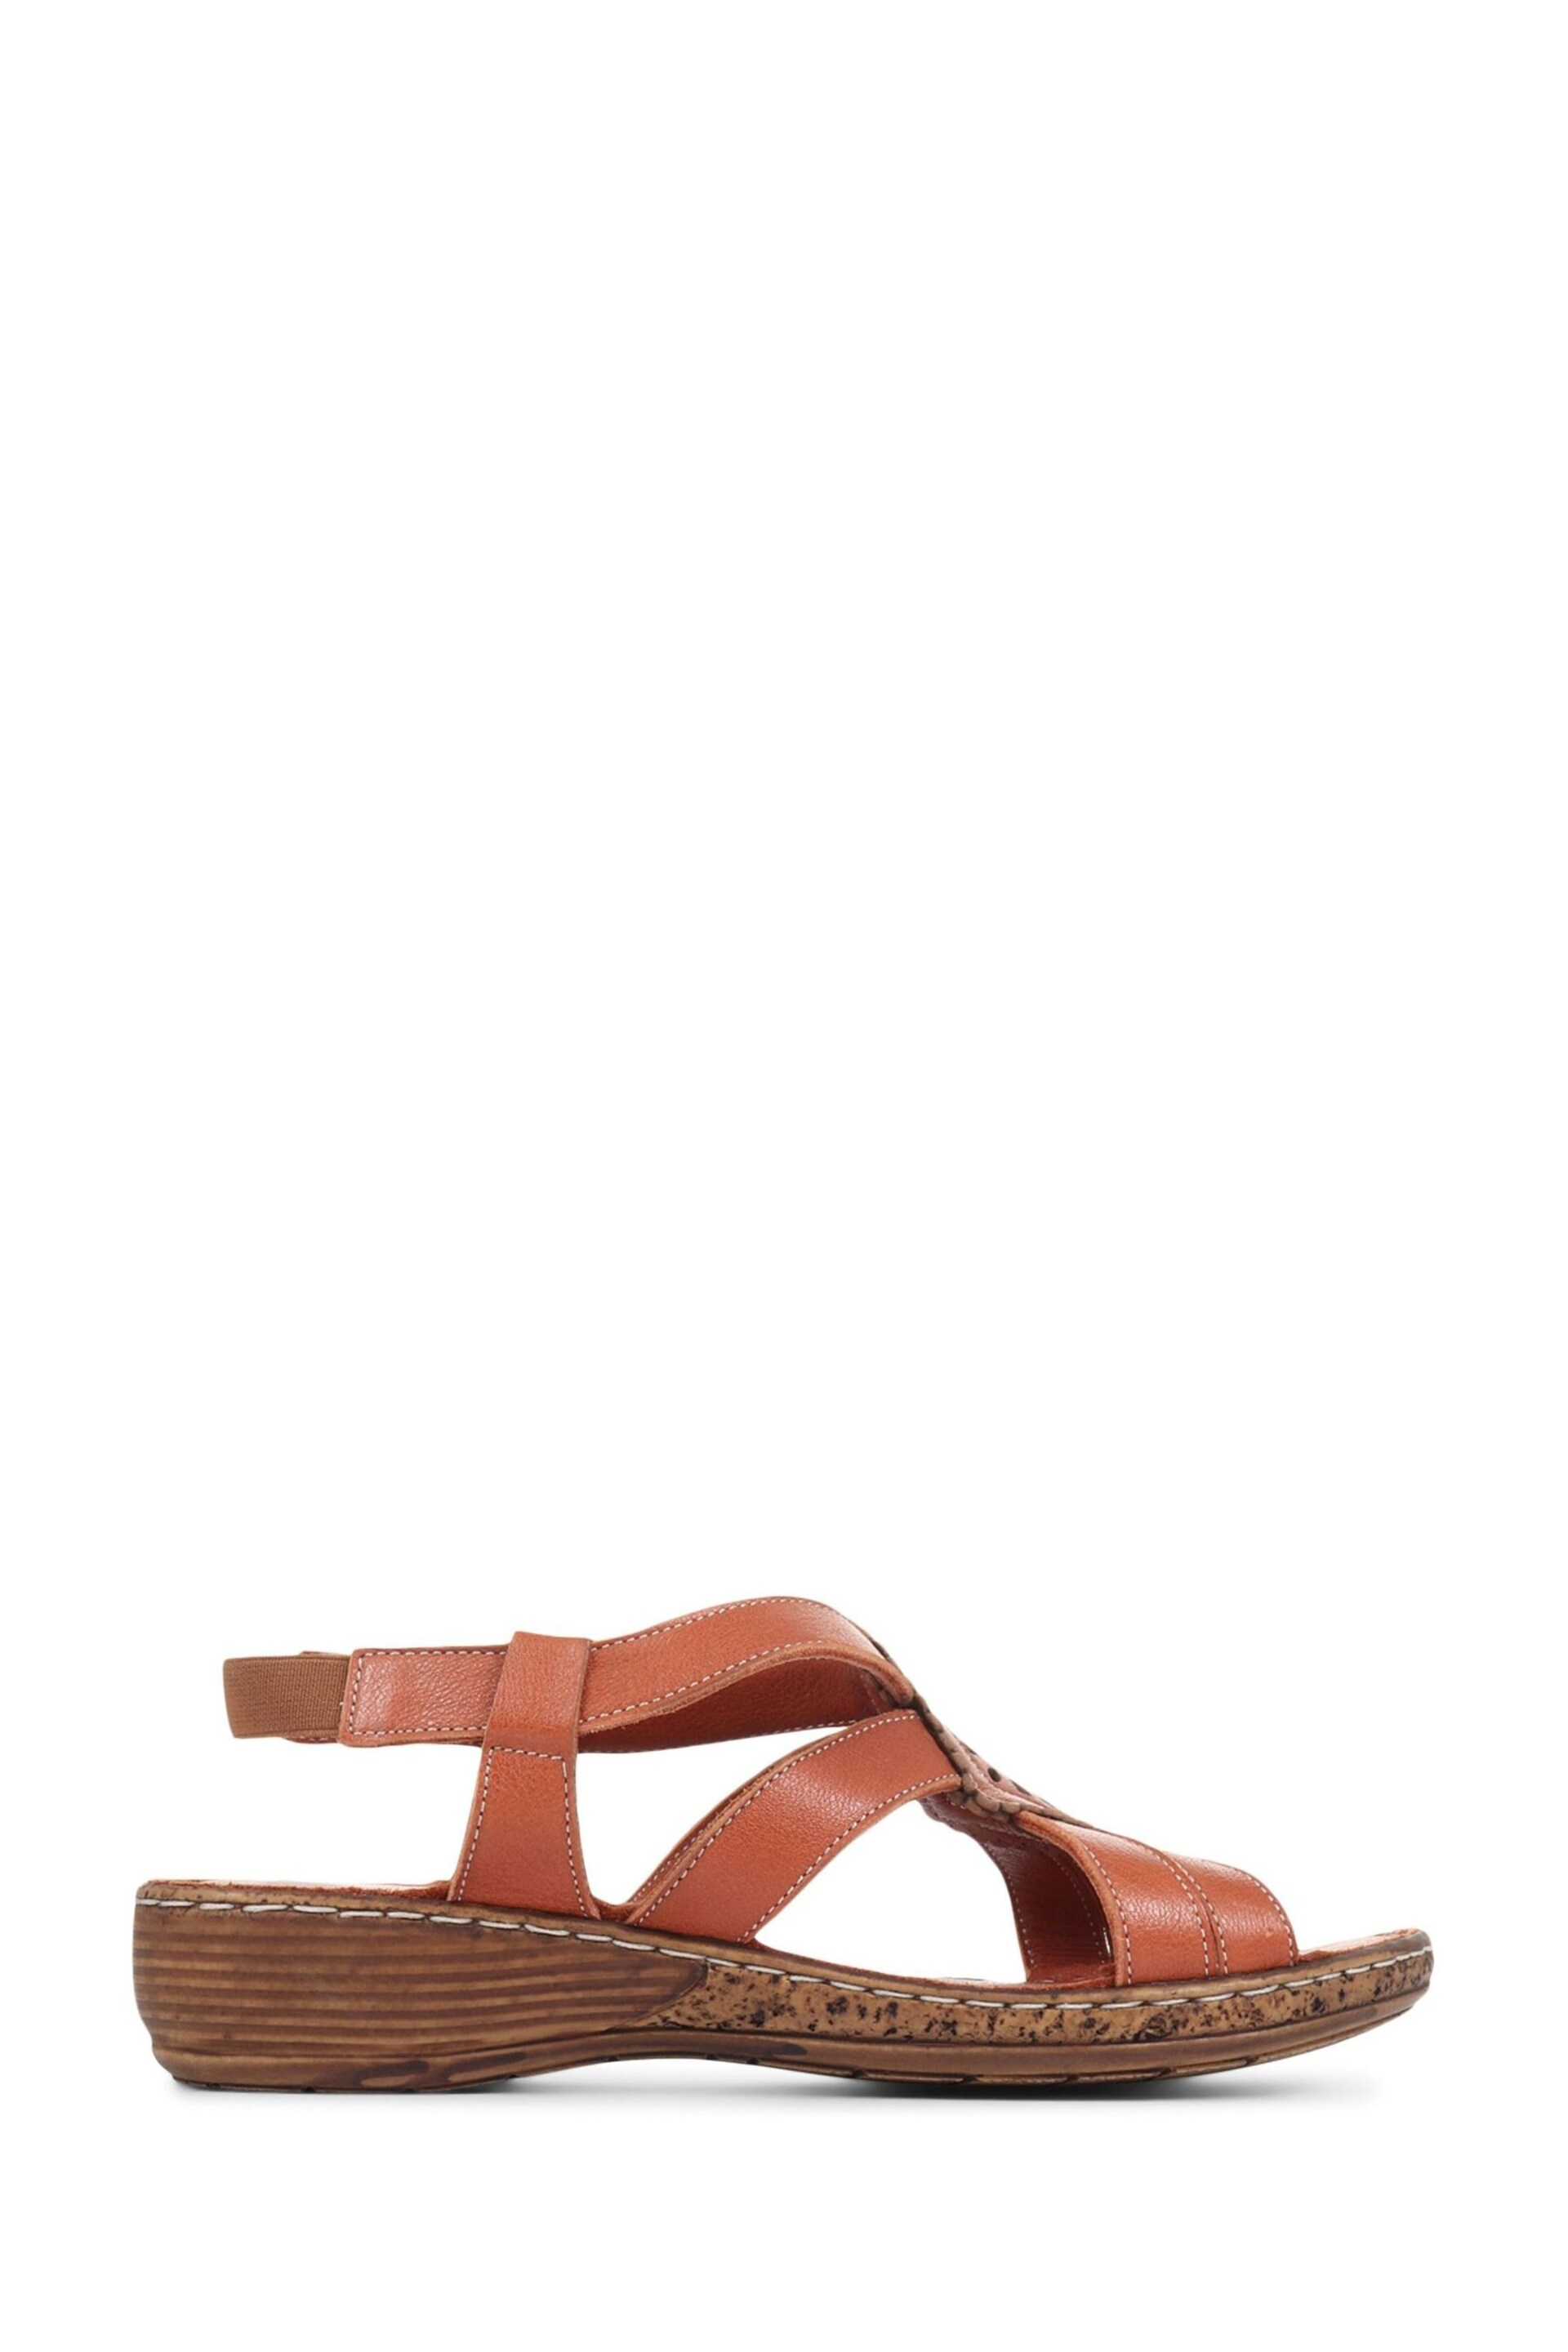 Pavers Leather Slingback Sandals - Image 3 of 5